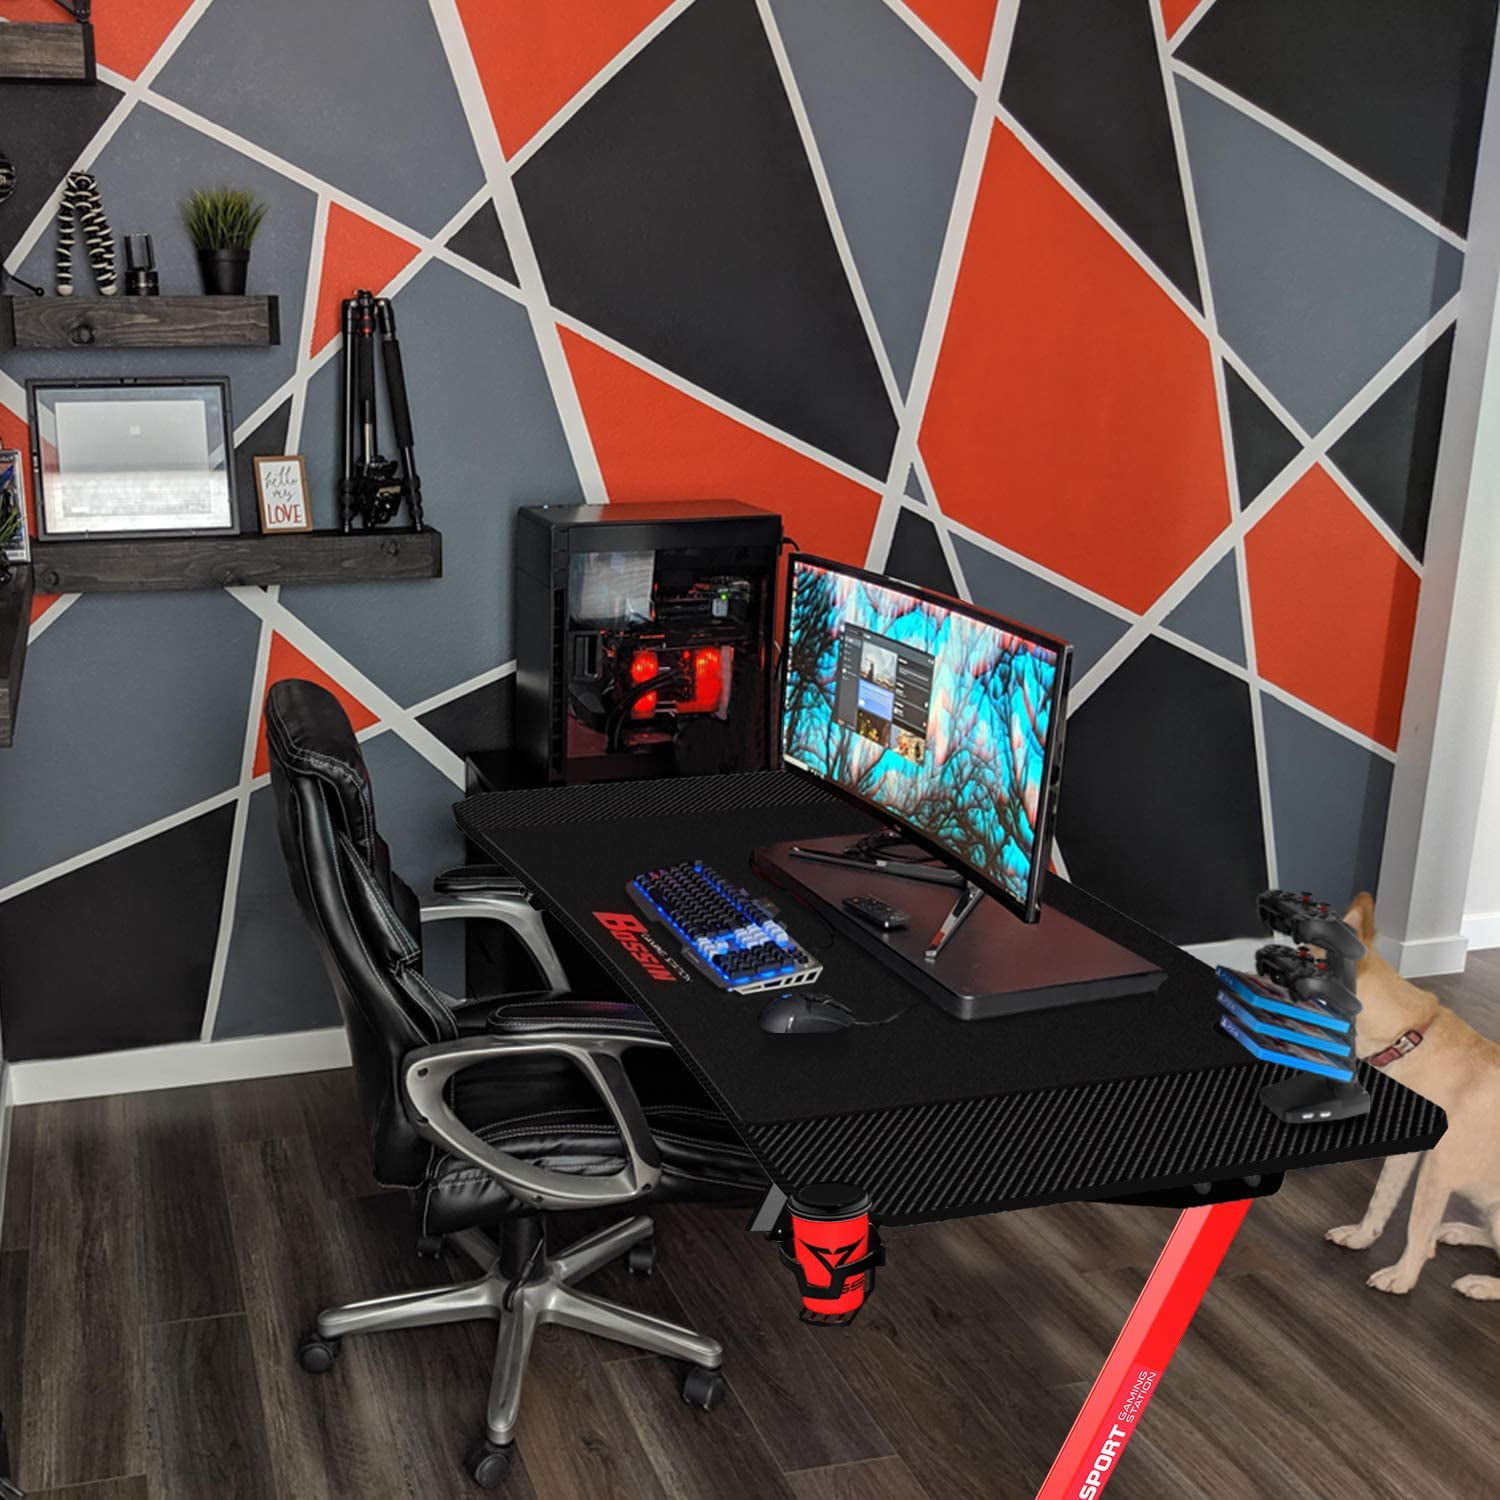 Buy Vitesse 55 inch Gaming Desk, Gaming Computer Desk, PC Gaming Table, T  Shaped Racing Style Professional Gamer Game Station with Full Mouse pad,  Gaming Handle Rack, Cup Holder Headphone Hook Online